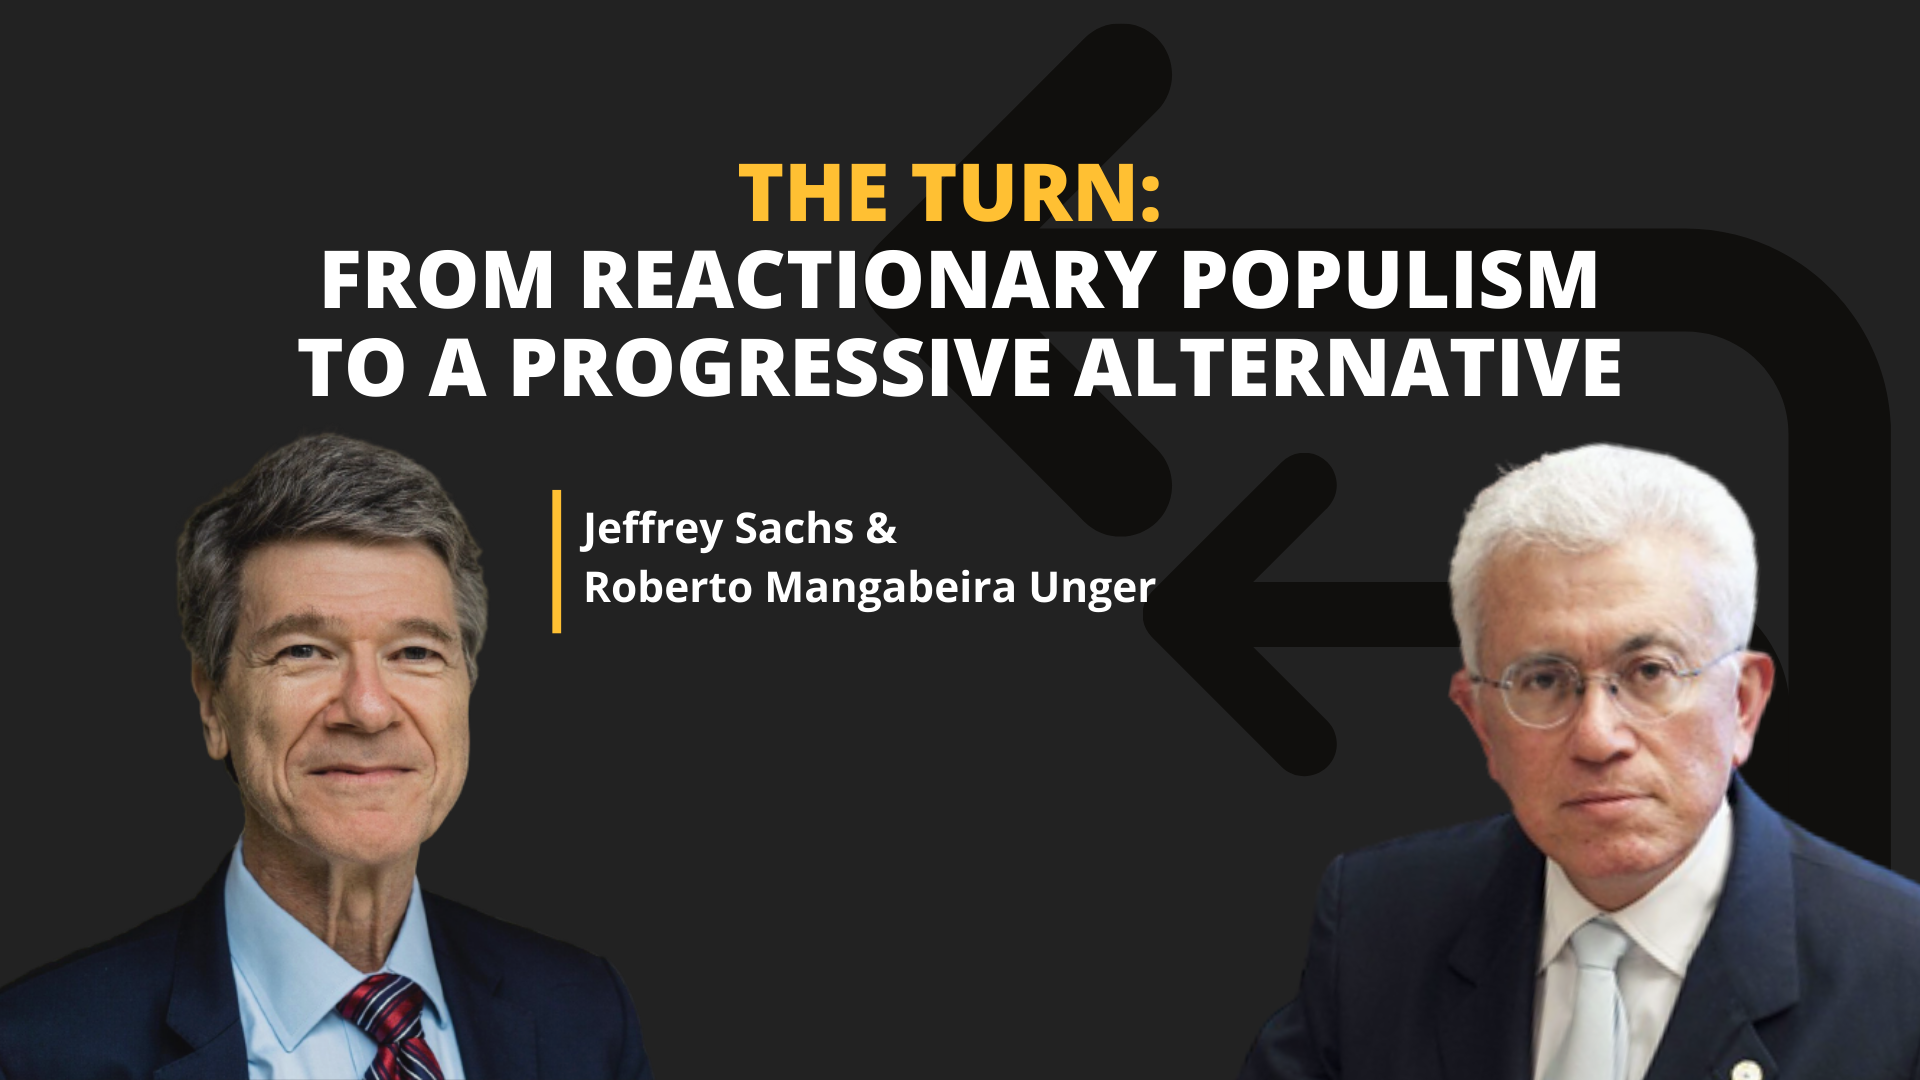 The Turn: From Reactionary Populism to a Progressive Alternative